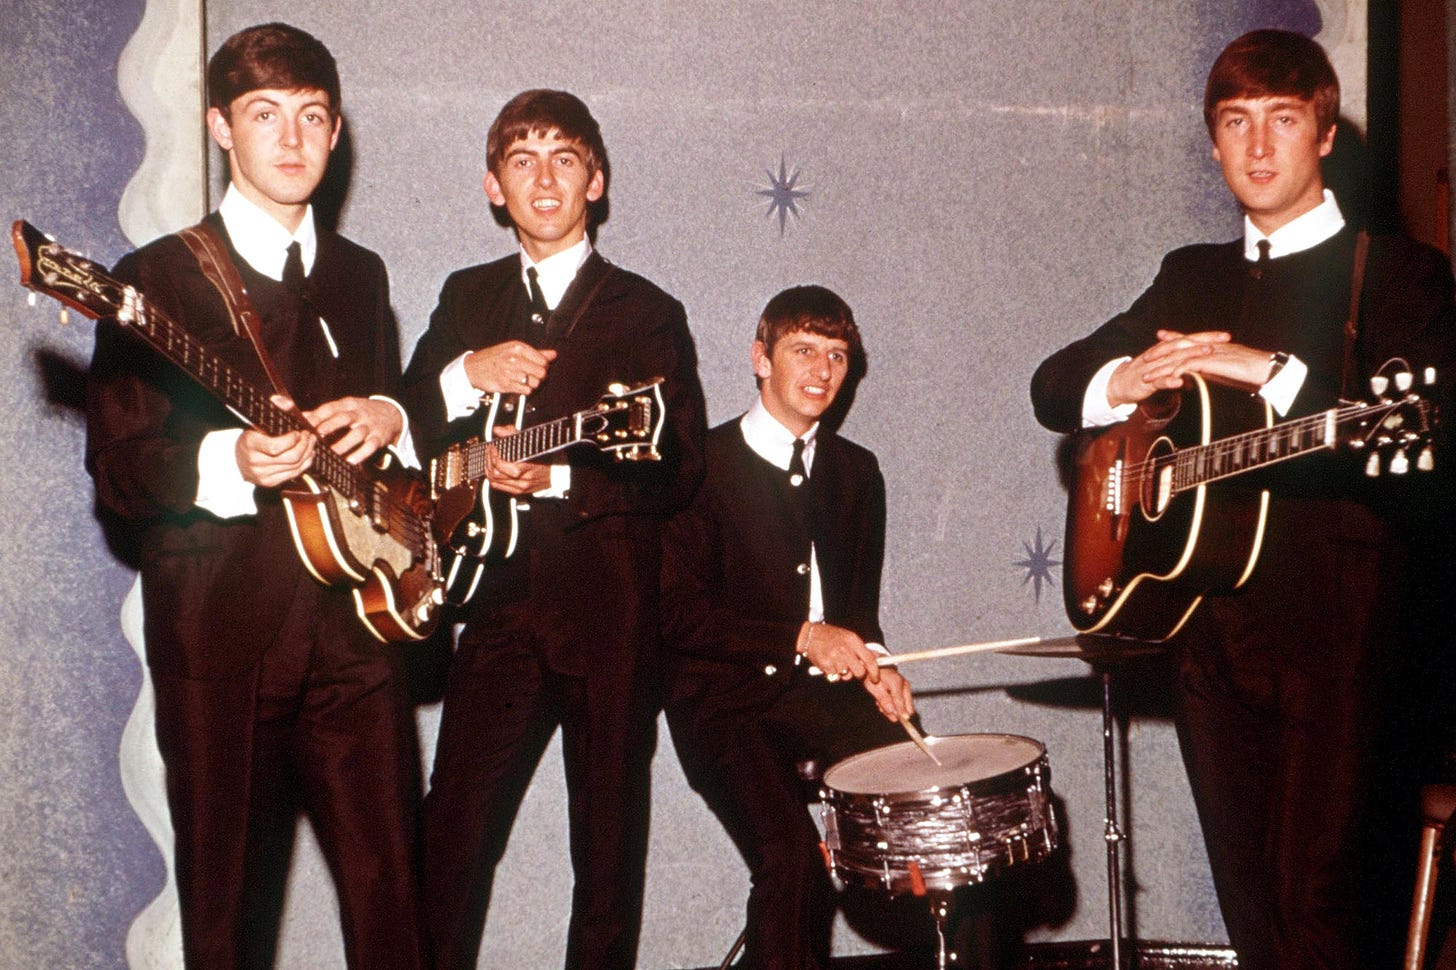 How the Beatles helped 'Twist and Shout' conquer the world